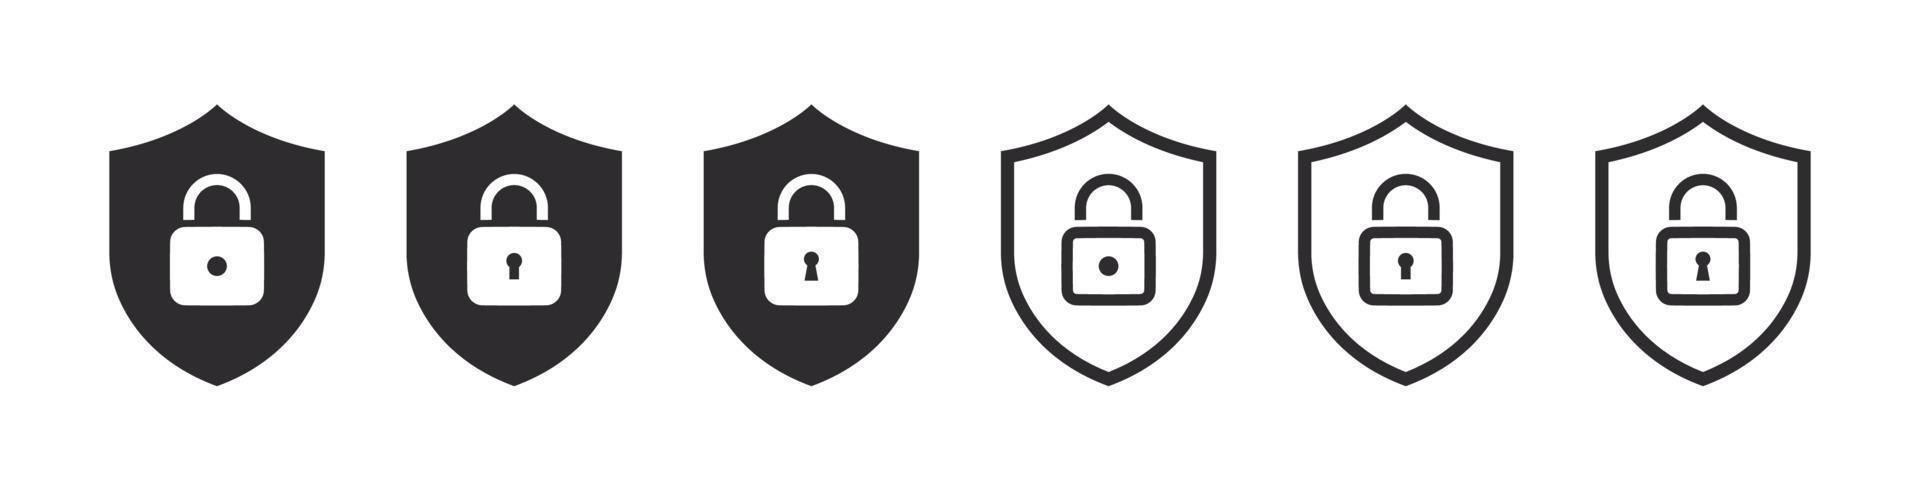 Security lock icons. Padlock and shield. Privacy symbol. Security symbol. Vector illustration